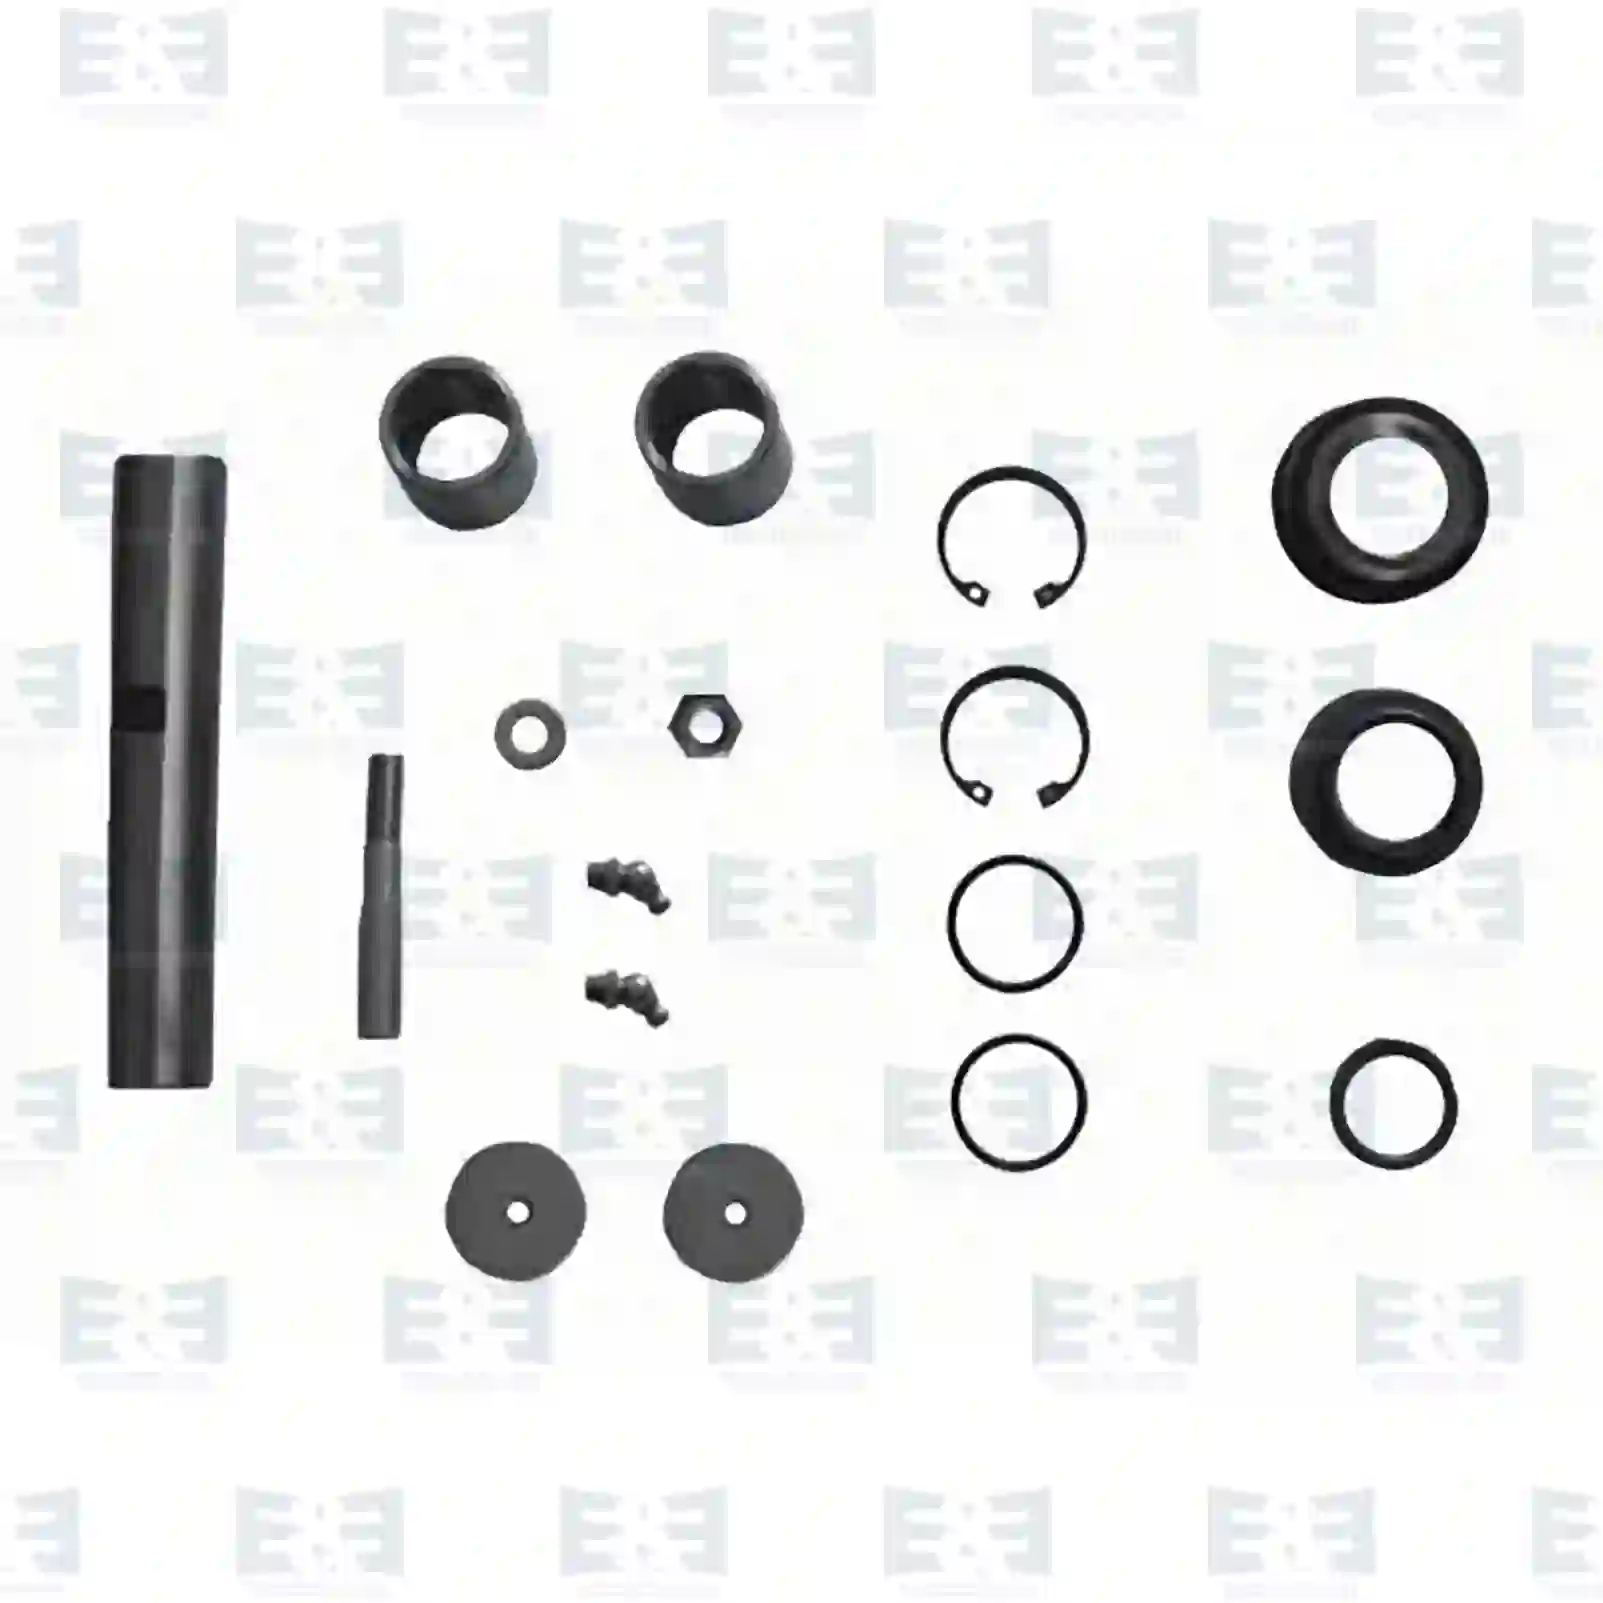  King pin kit || E&E Truck Spare Parts | Truck Spare Parts, Auotomotive Spare Parts